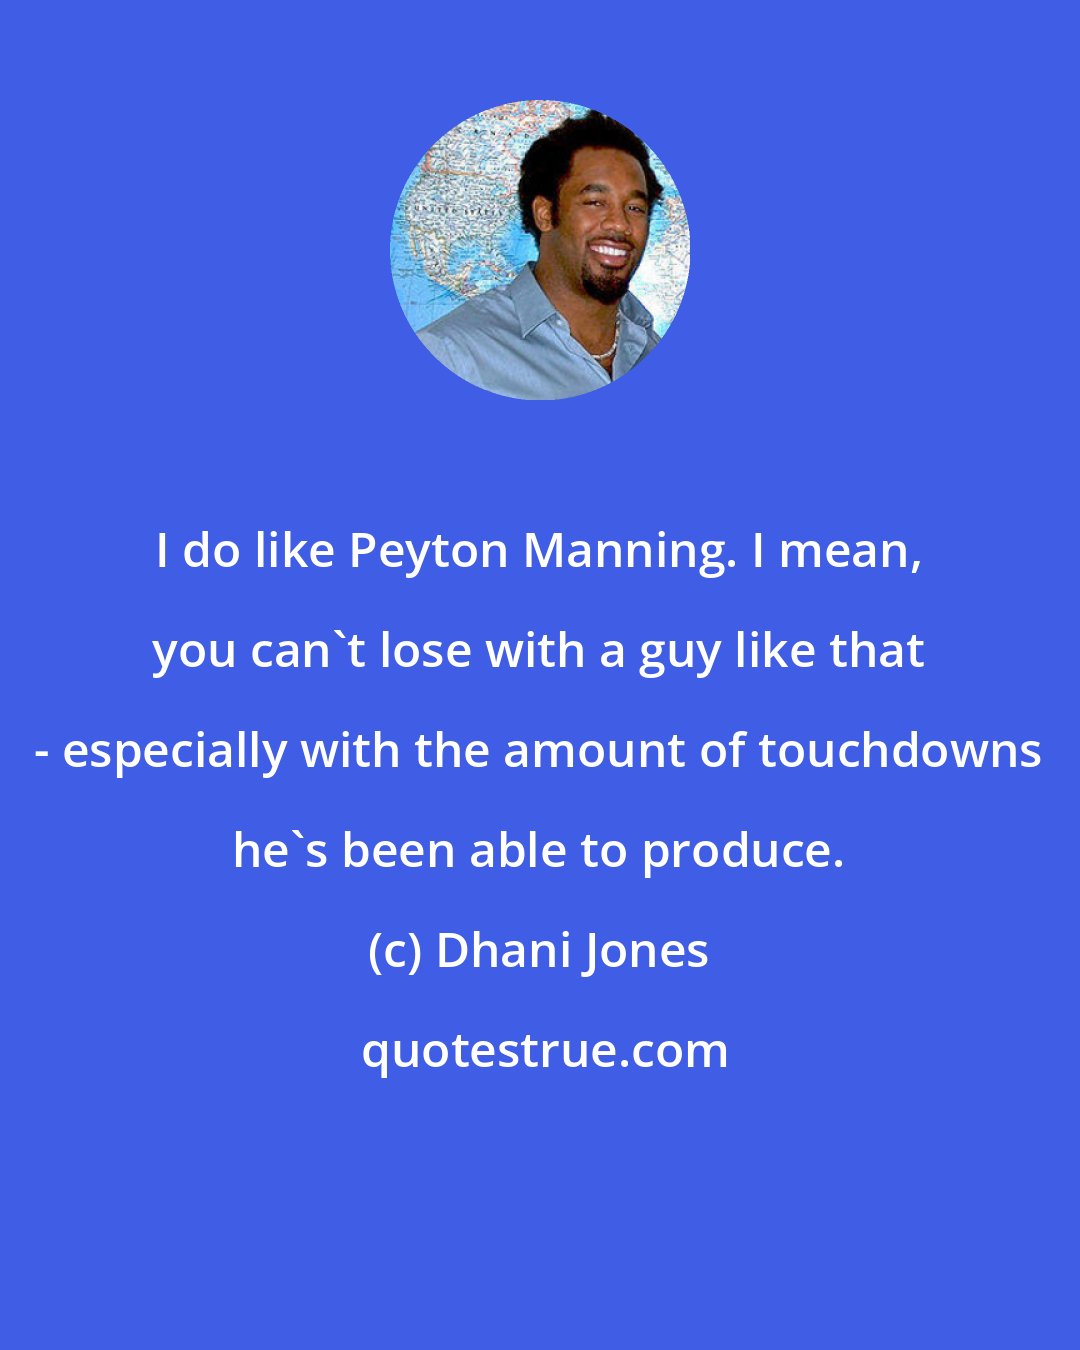 Dhani Jones: I do like Peyton Manning. I mean, you can't lose with a guy like that - especially with the amount of touchdowns he's been able to produce.